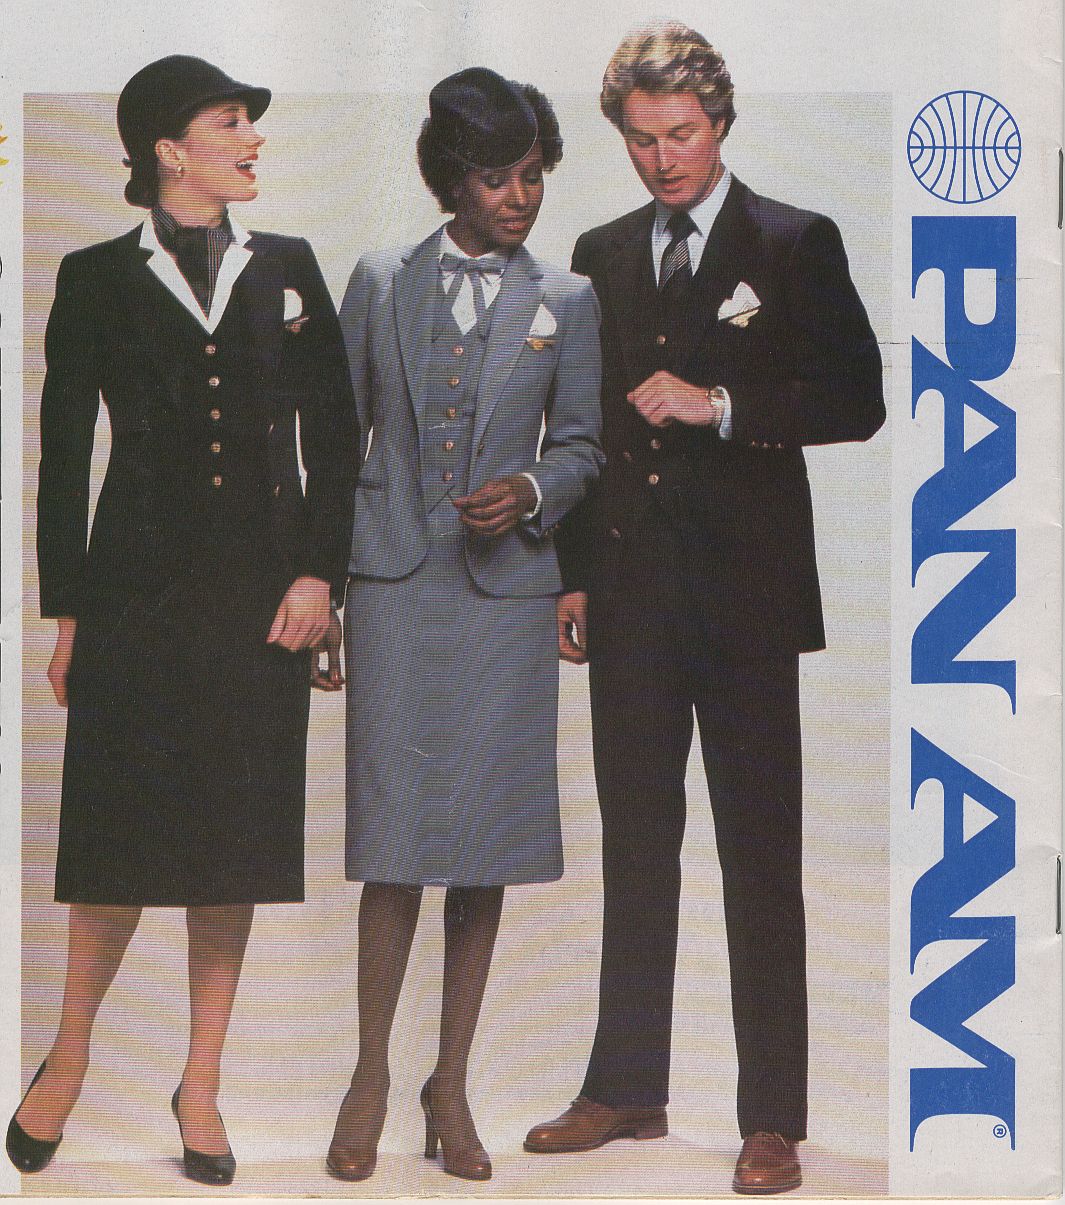 In July of 1980 Pan Am introduced new flight attendant uniforms designed fy popular 1980s designer Adolfo.  The uniform came in both navy & powder blue.  The uniform would be modified in the late 1980s with different blouses, ties, scarves and aprons.  At that time the powder blue option was discontinued.